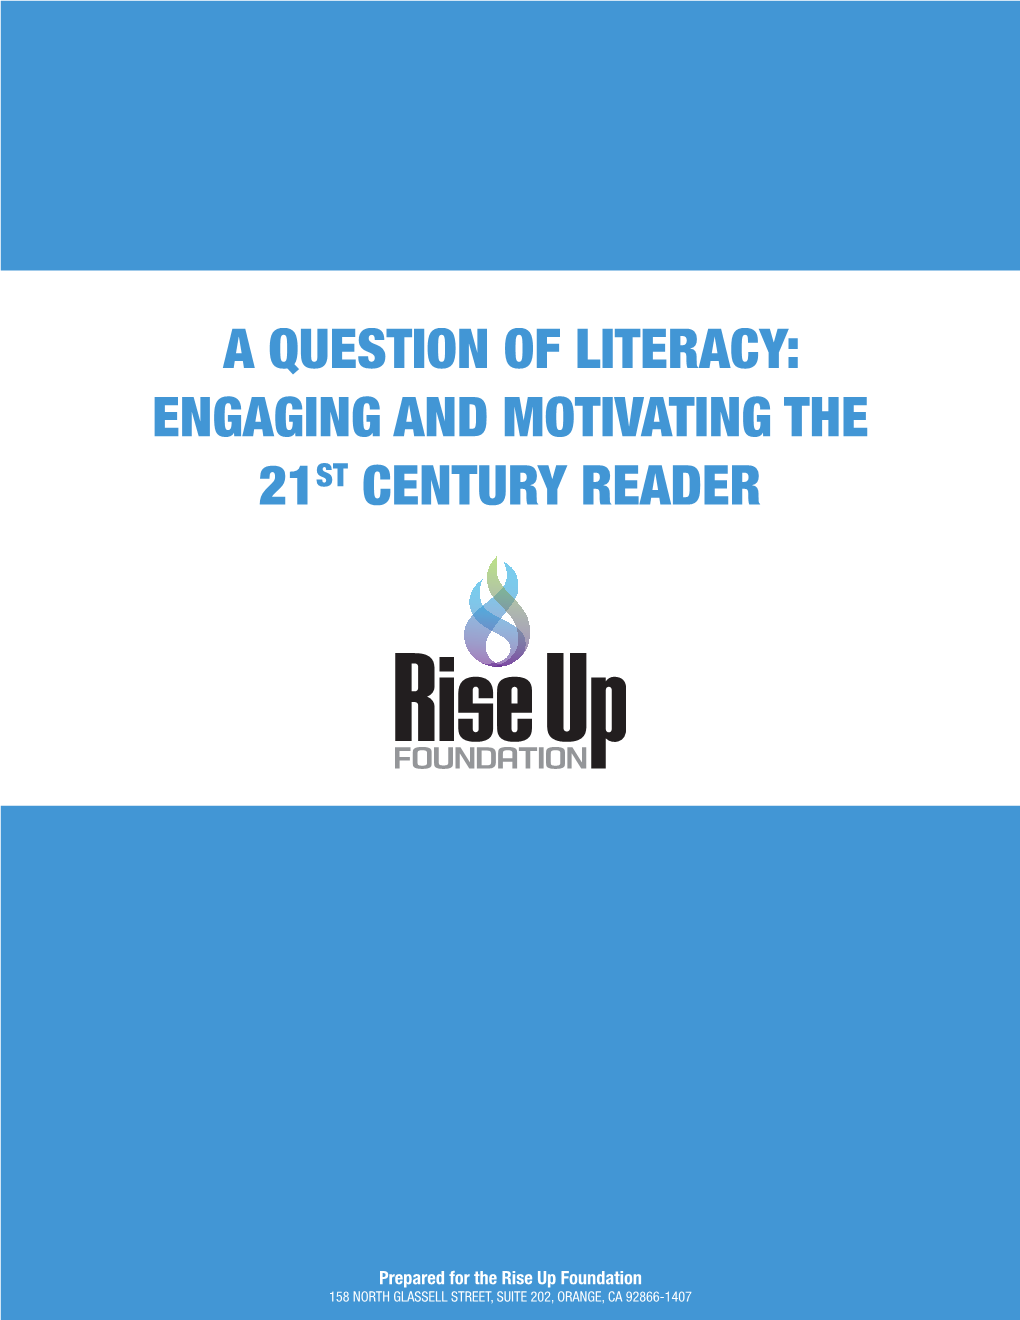 A Question of Literacy: Engaging and Motivating the 21St Century Reader